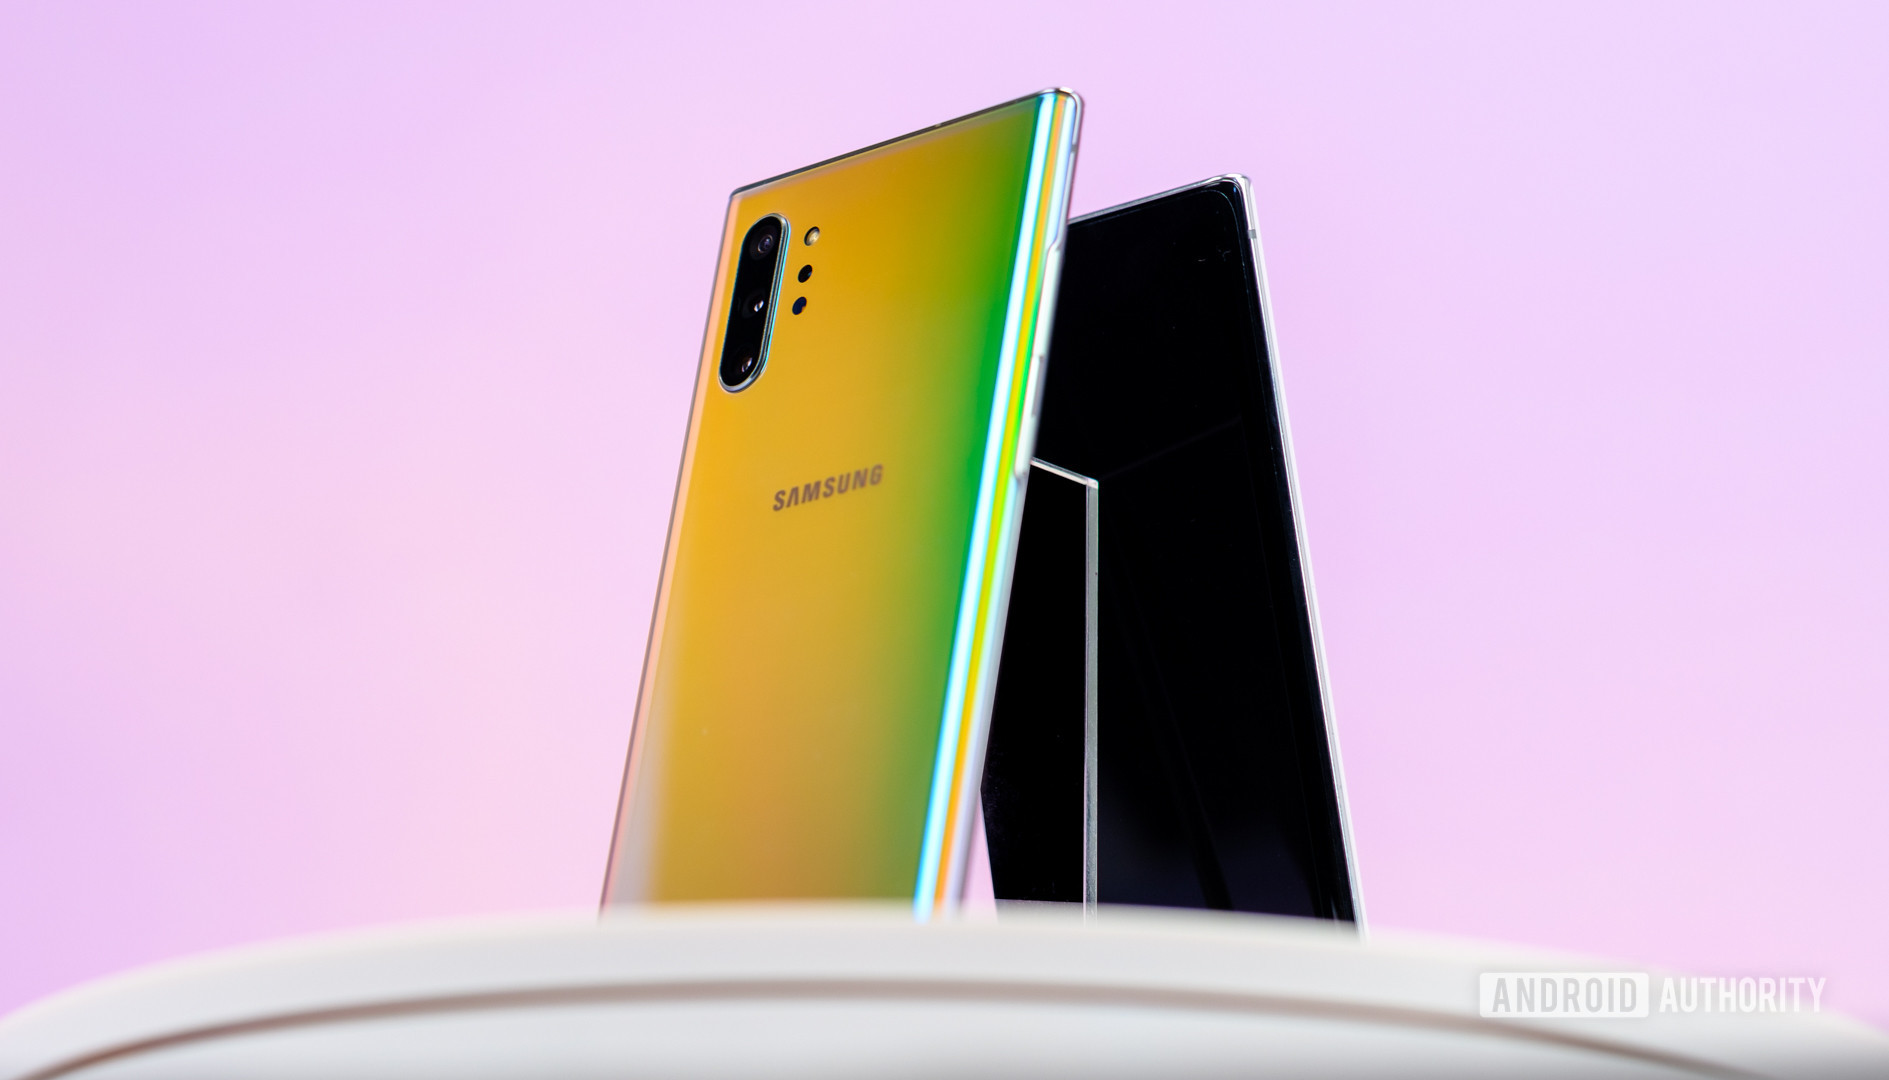 Samsung Galaxy Note 10 And Samsung Galaxy Note 10 Plus Specs